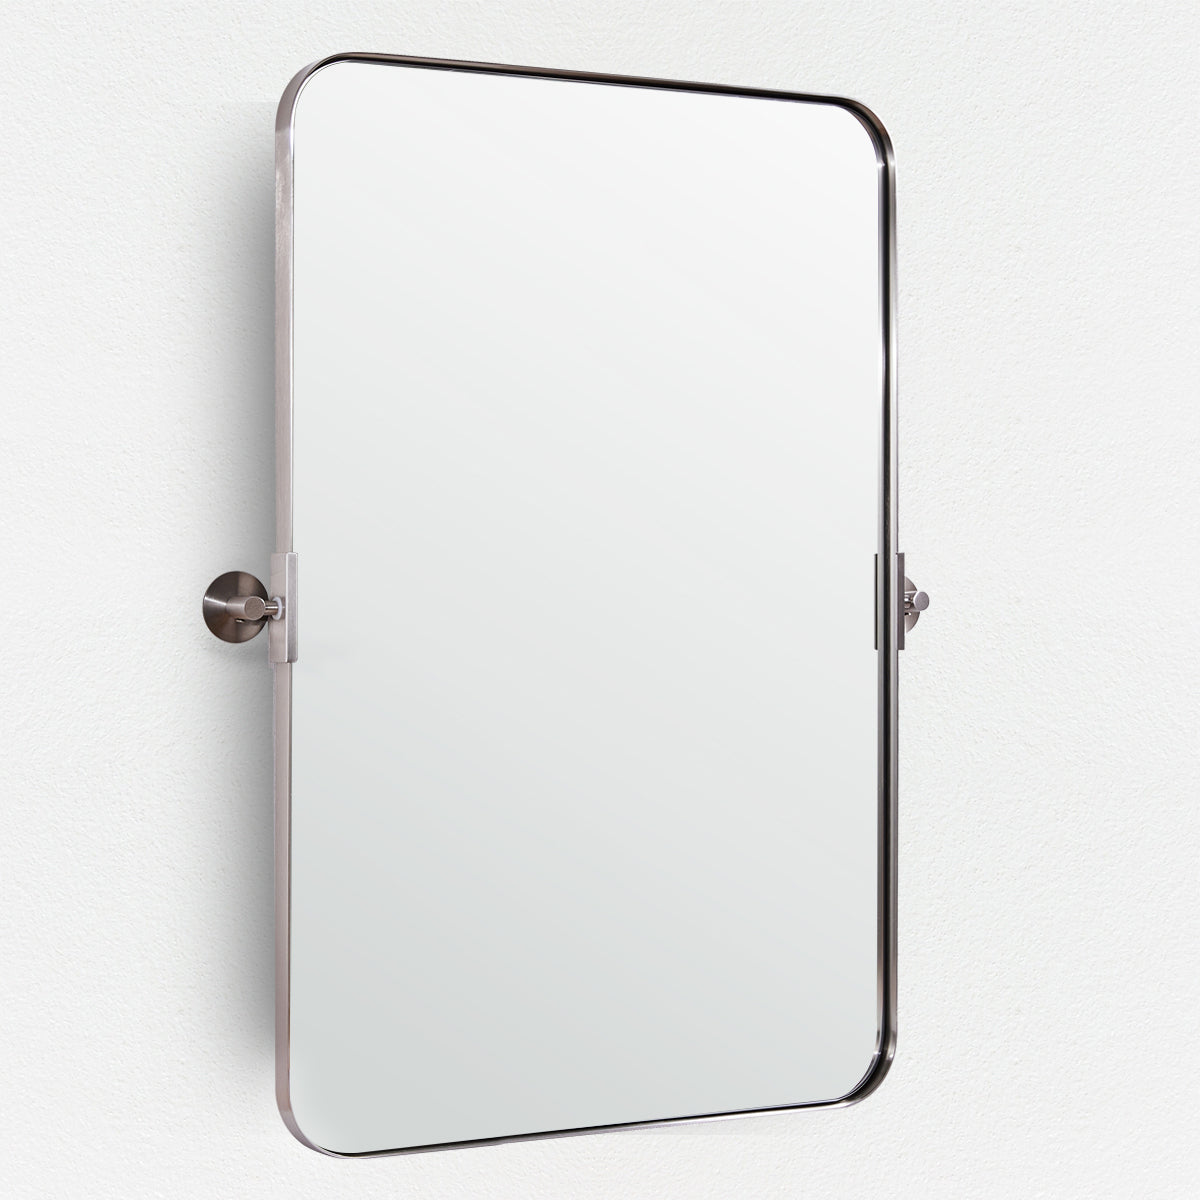 Modern Tilting Pivot Mirror for Bathroom Vanity Rounded Rectangle Mirror Adjustable Swivel Wall Mirror| Stainless Steel Frame Mounted Vertically#color_brushed nickel